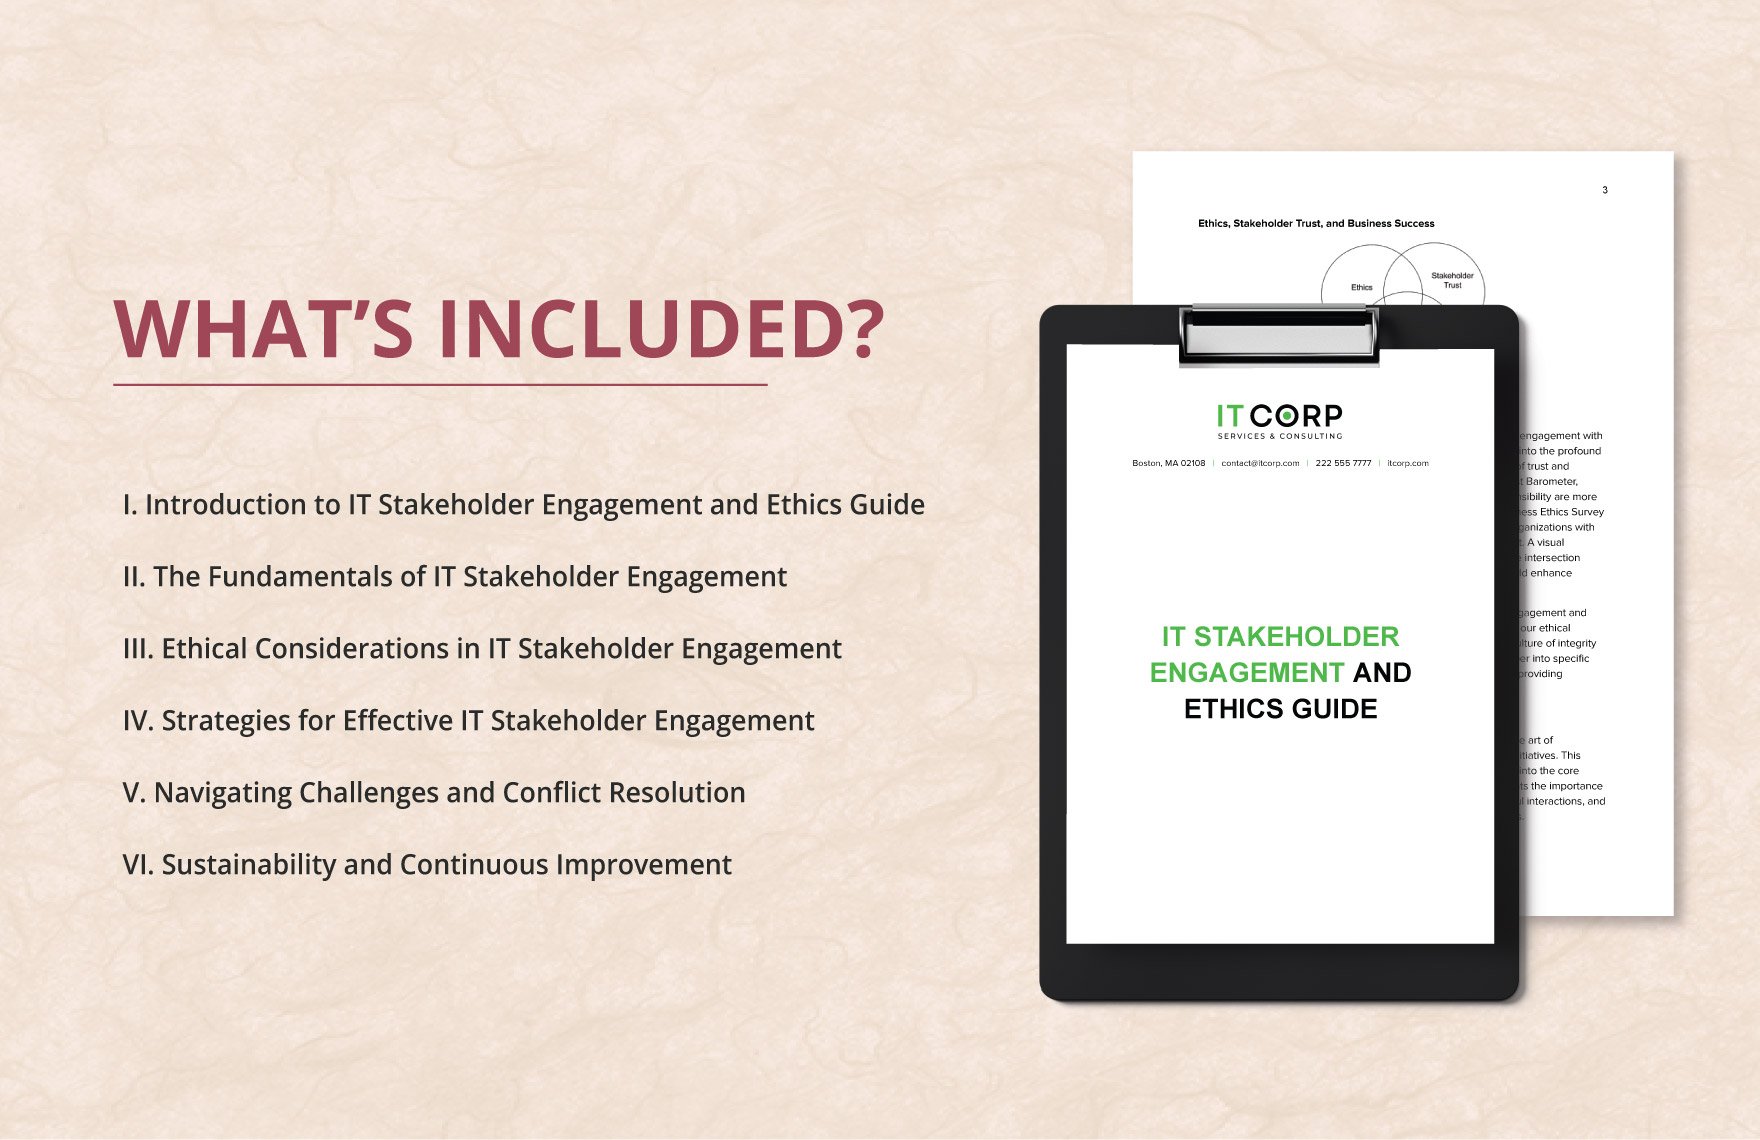 IT Stakeholder Engagement and Ethics Guide Template